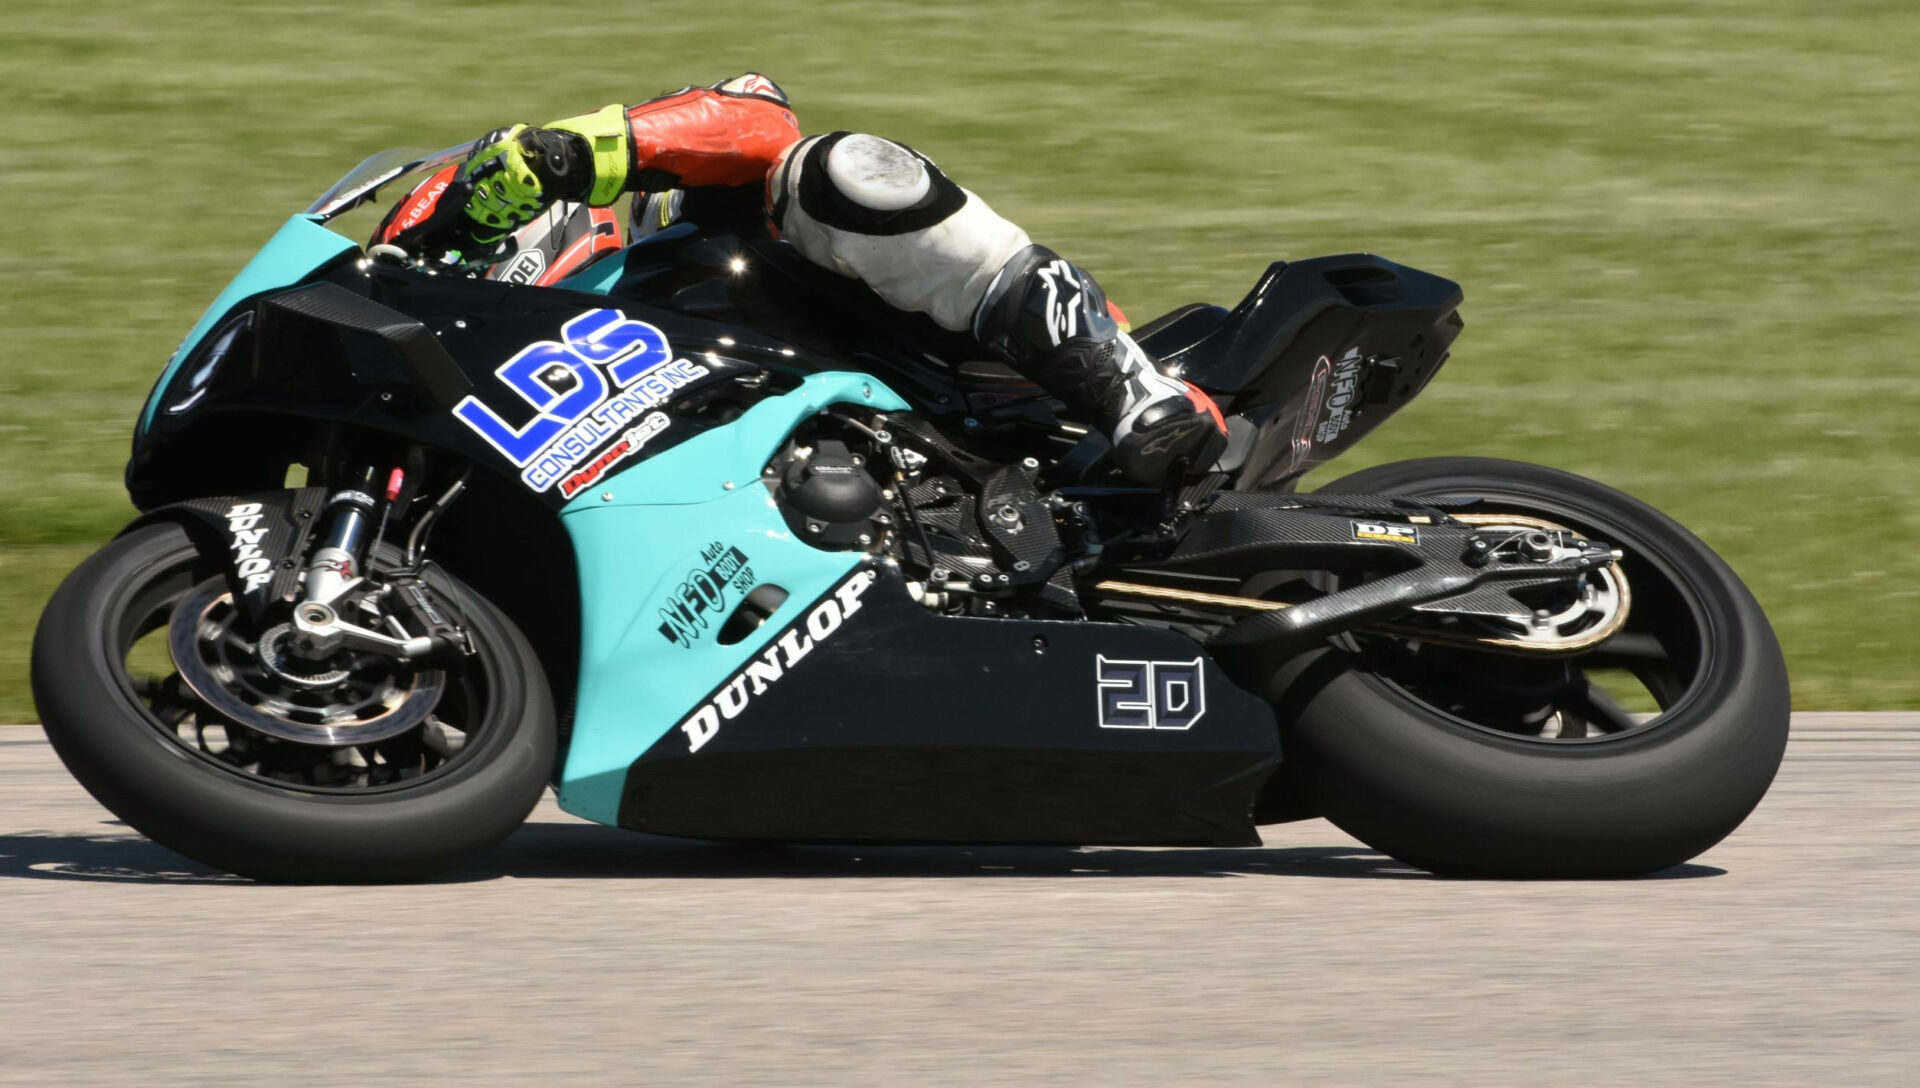 Rookie Trevor Dion (20) surprised the Pro Superbike grid with the early pace on Thursday at the Grand Bend Motorplex. Photo by Colin Fraser, courtesy CSBK.